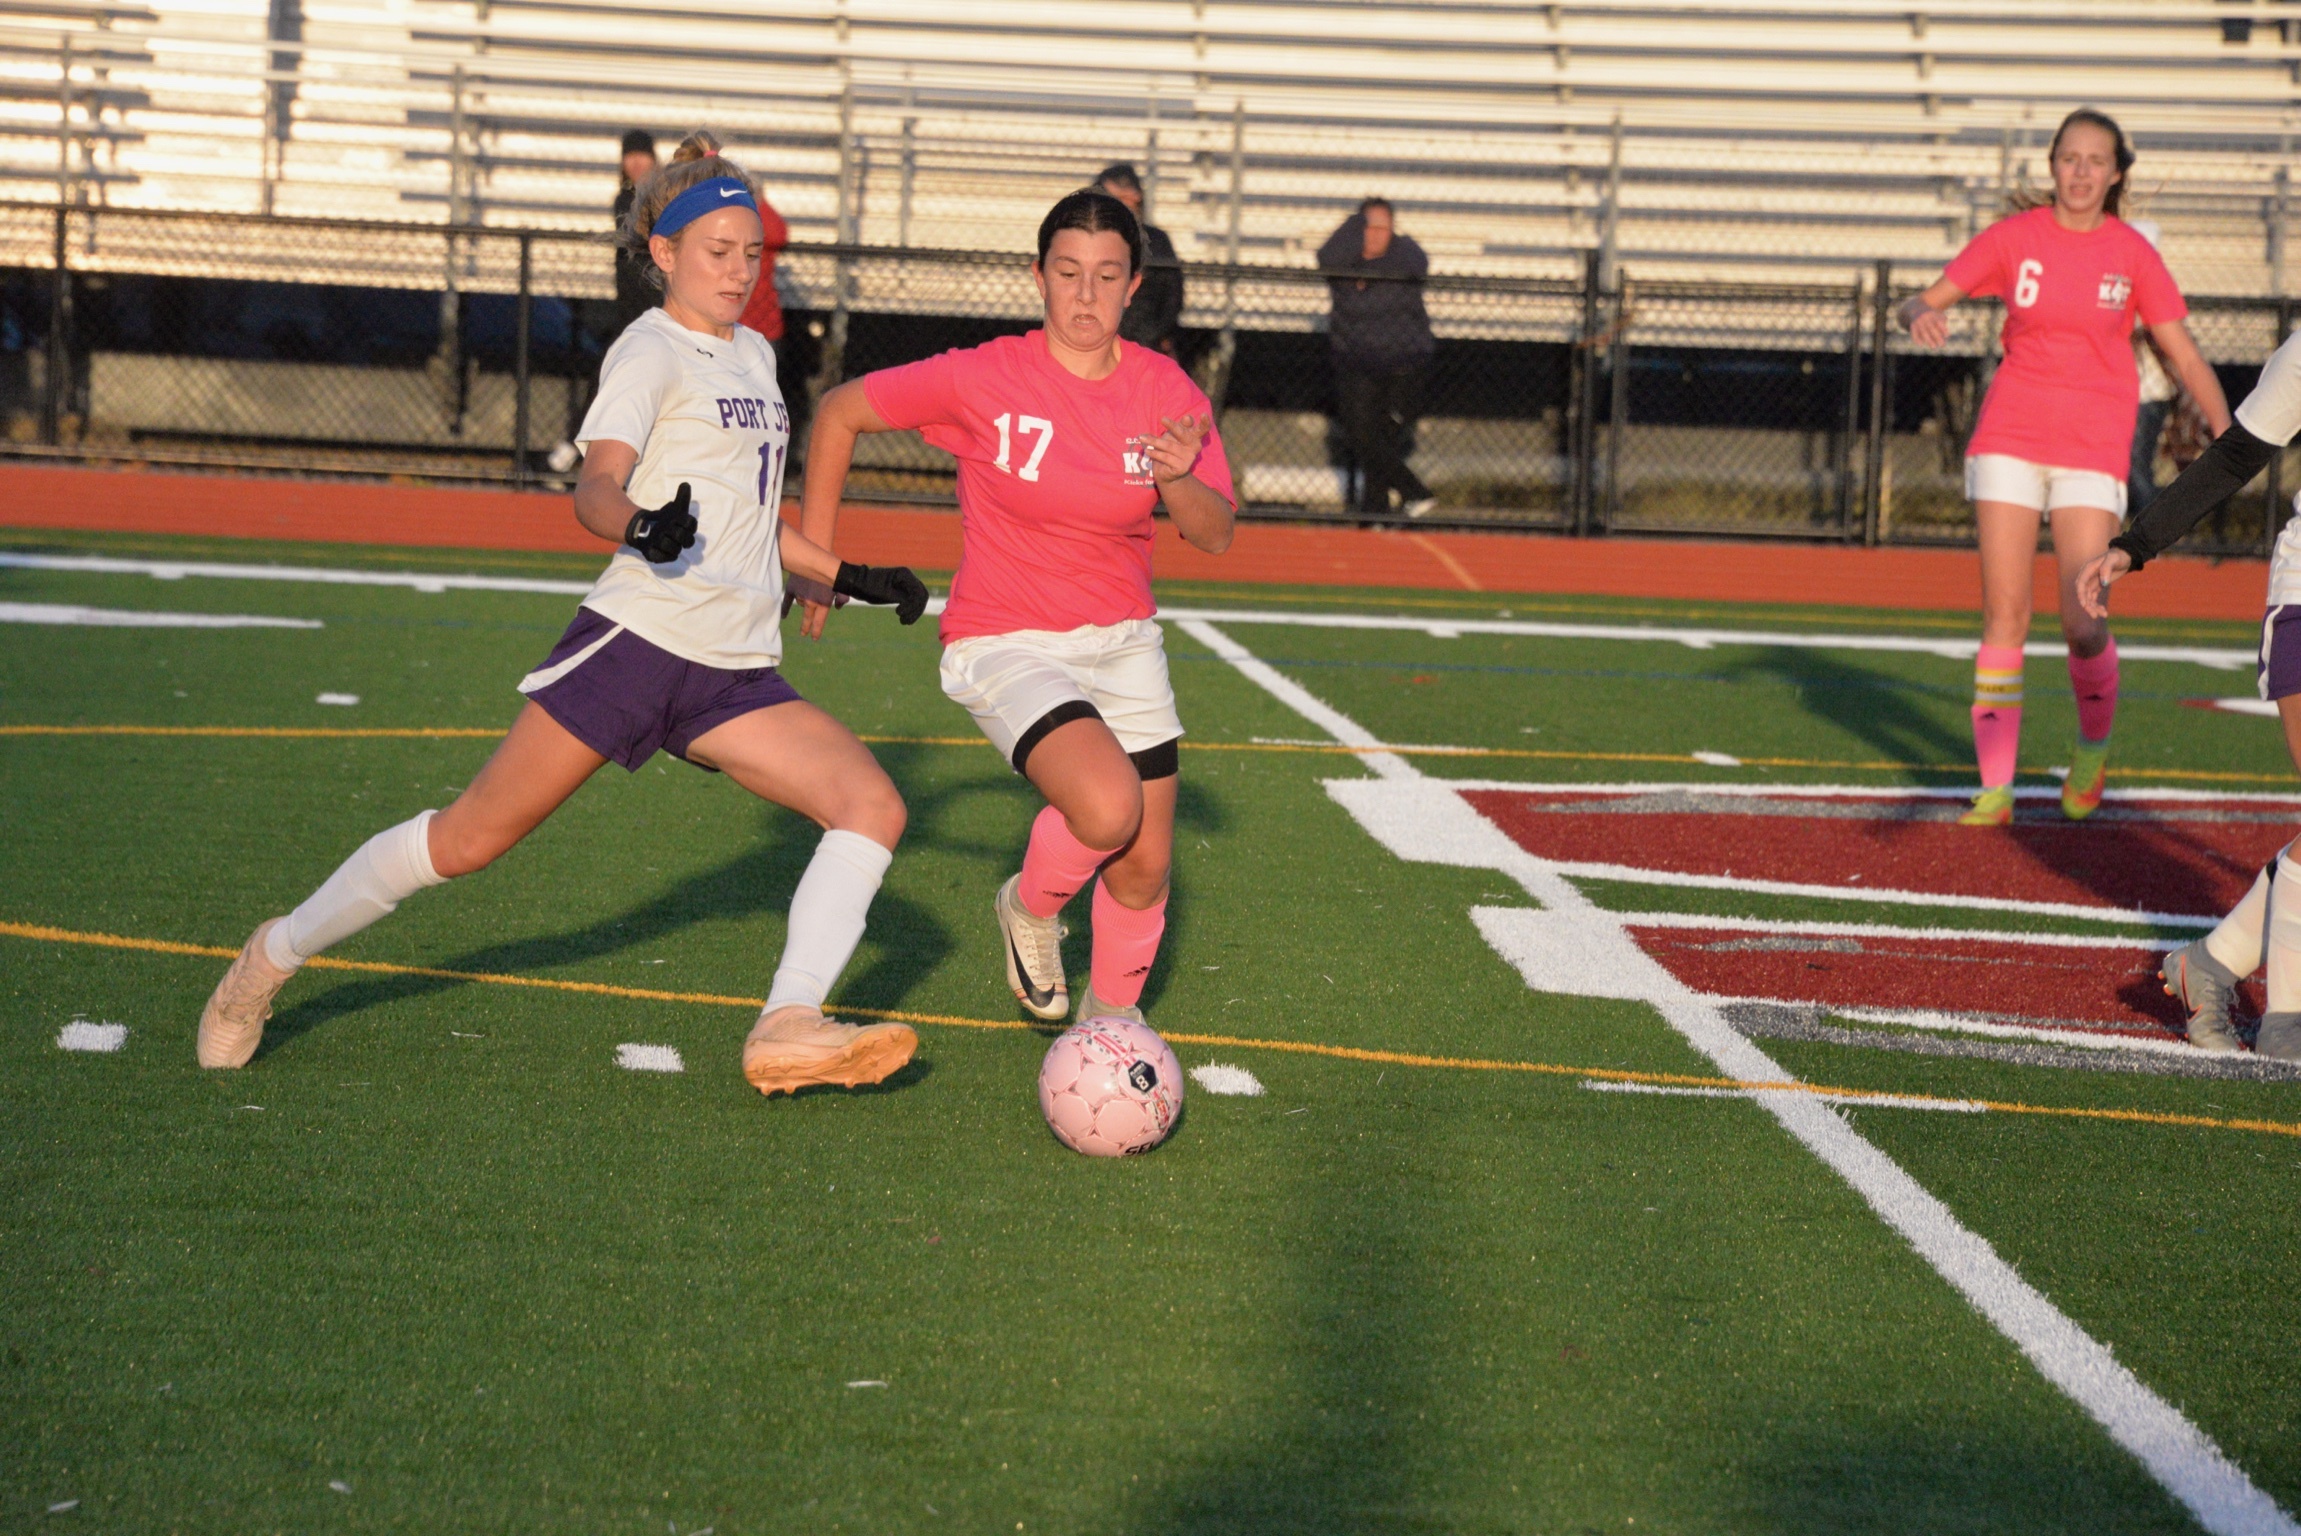 Sophomore Ellie Avallone scored a pair of goals in Southampton's 3-2 victory over Port Jeff last week.